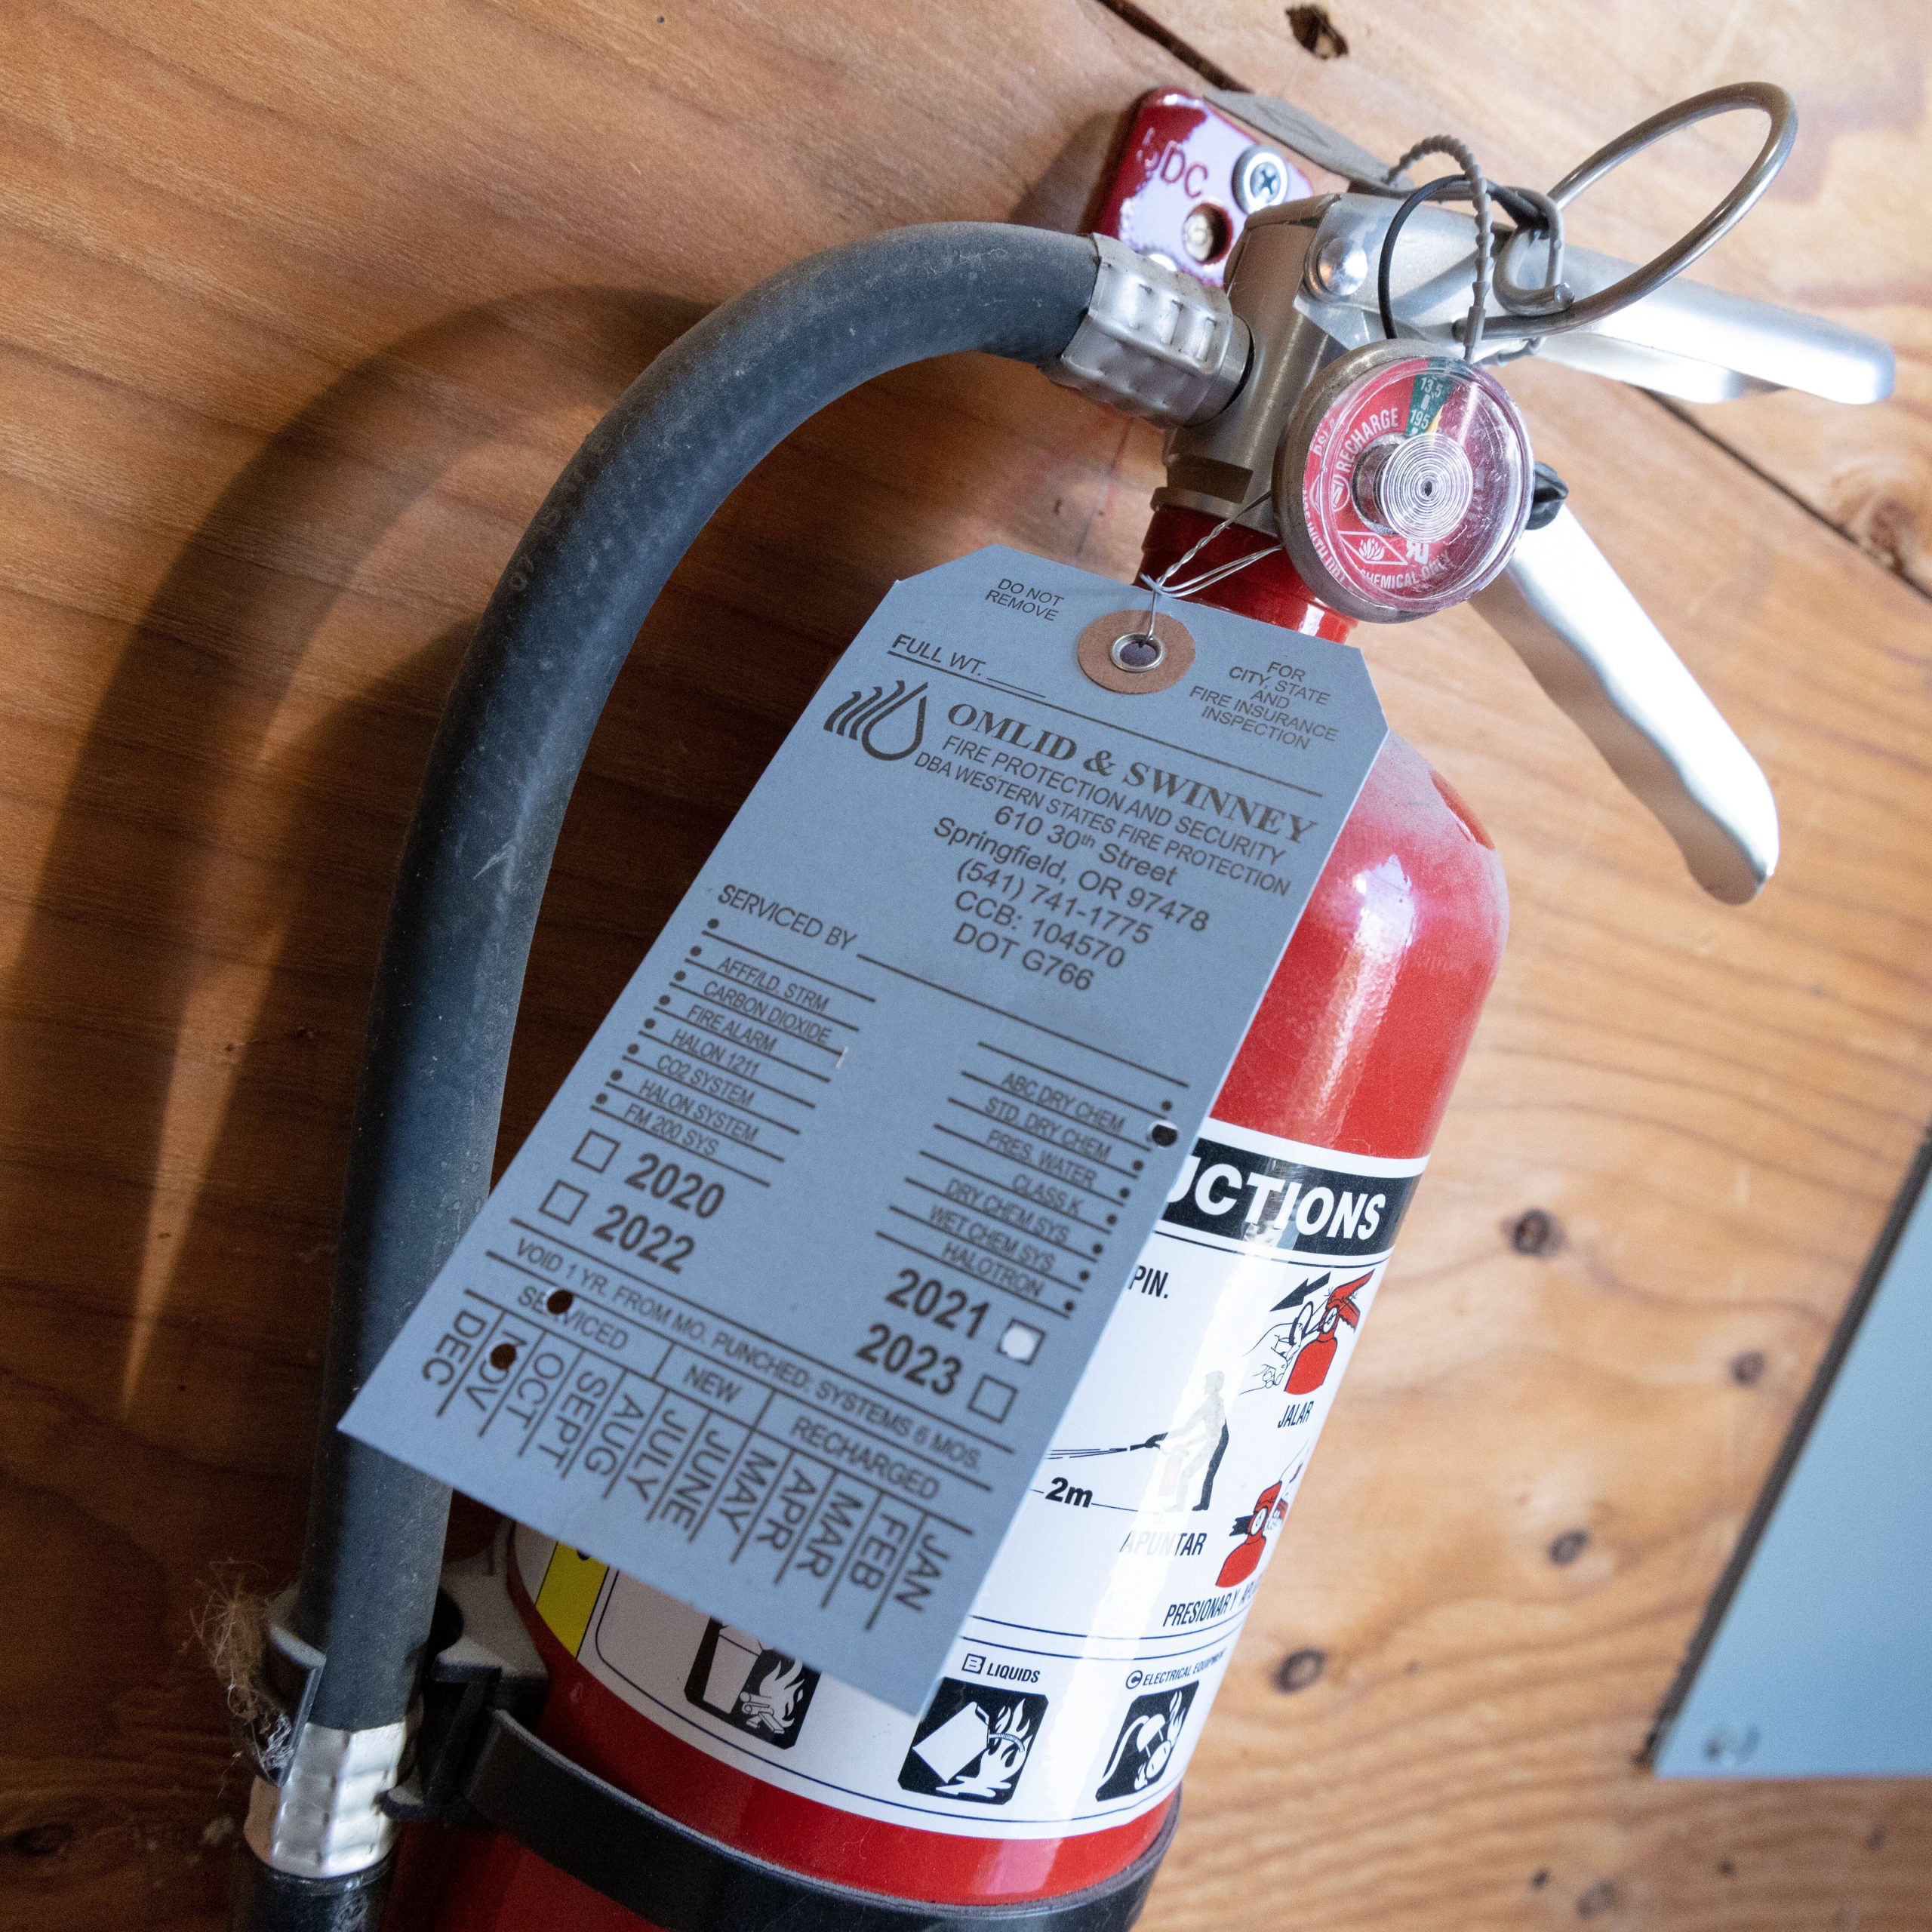 How Frequently Should You Get Your Fire Extinguisher Inspected?